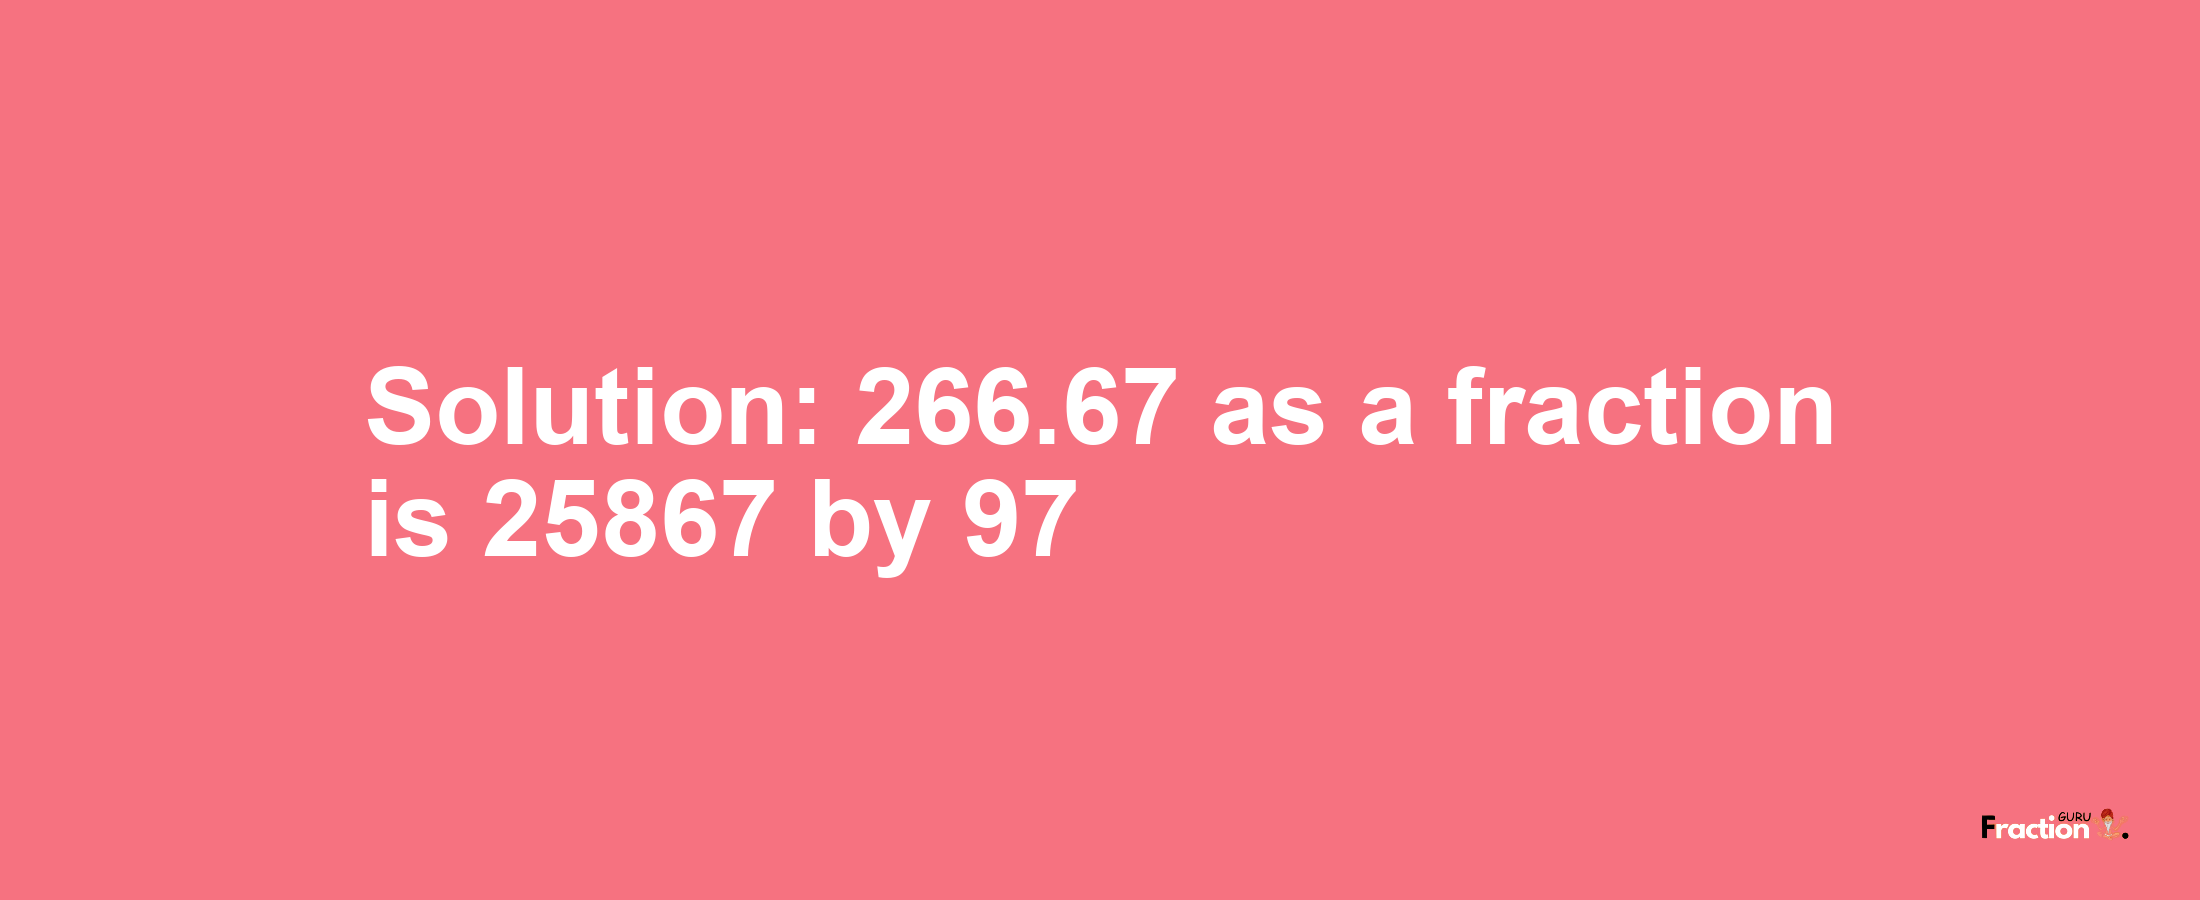 Solution:266.67 as a fraction is 25867/97